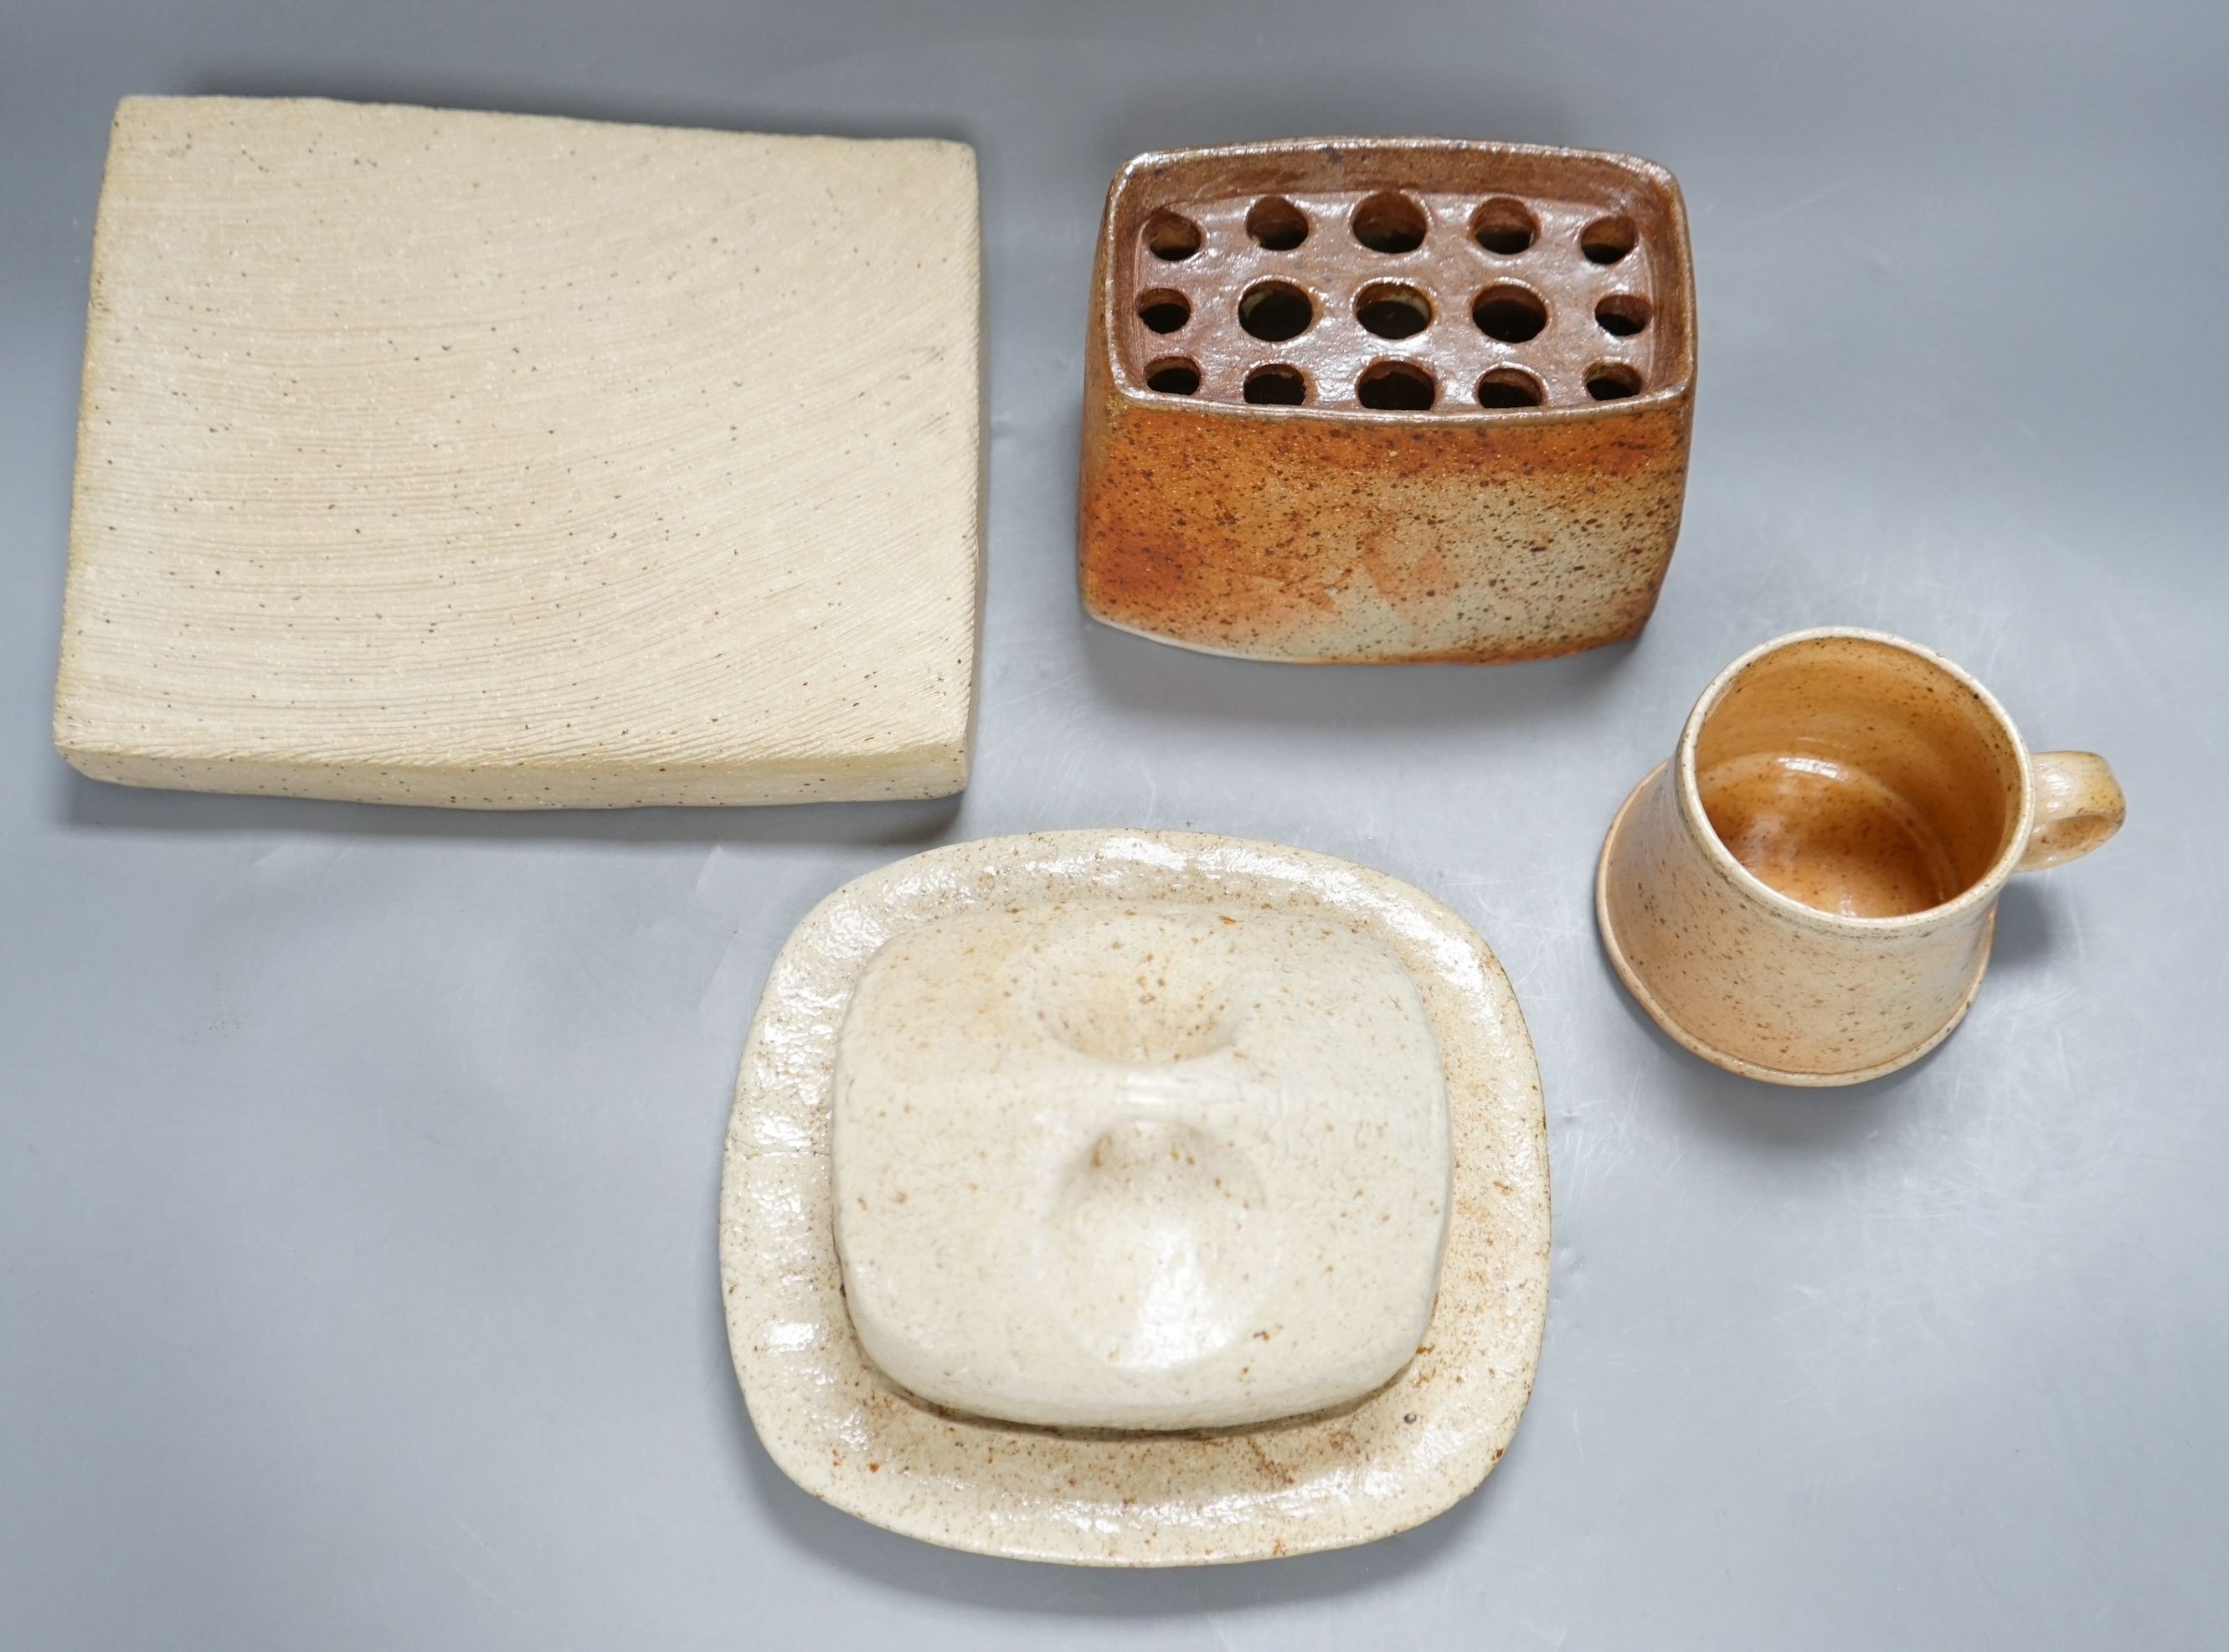 Sarah Walton (b.1945), a salt glazed stoneware flower brick, together with a salt glazed butter dish and cover, a similar mug, and a ‘Field’ horizontally carved linear slab, 22cm wide, all with impressed marks, (4)